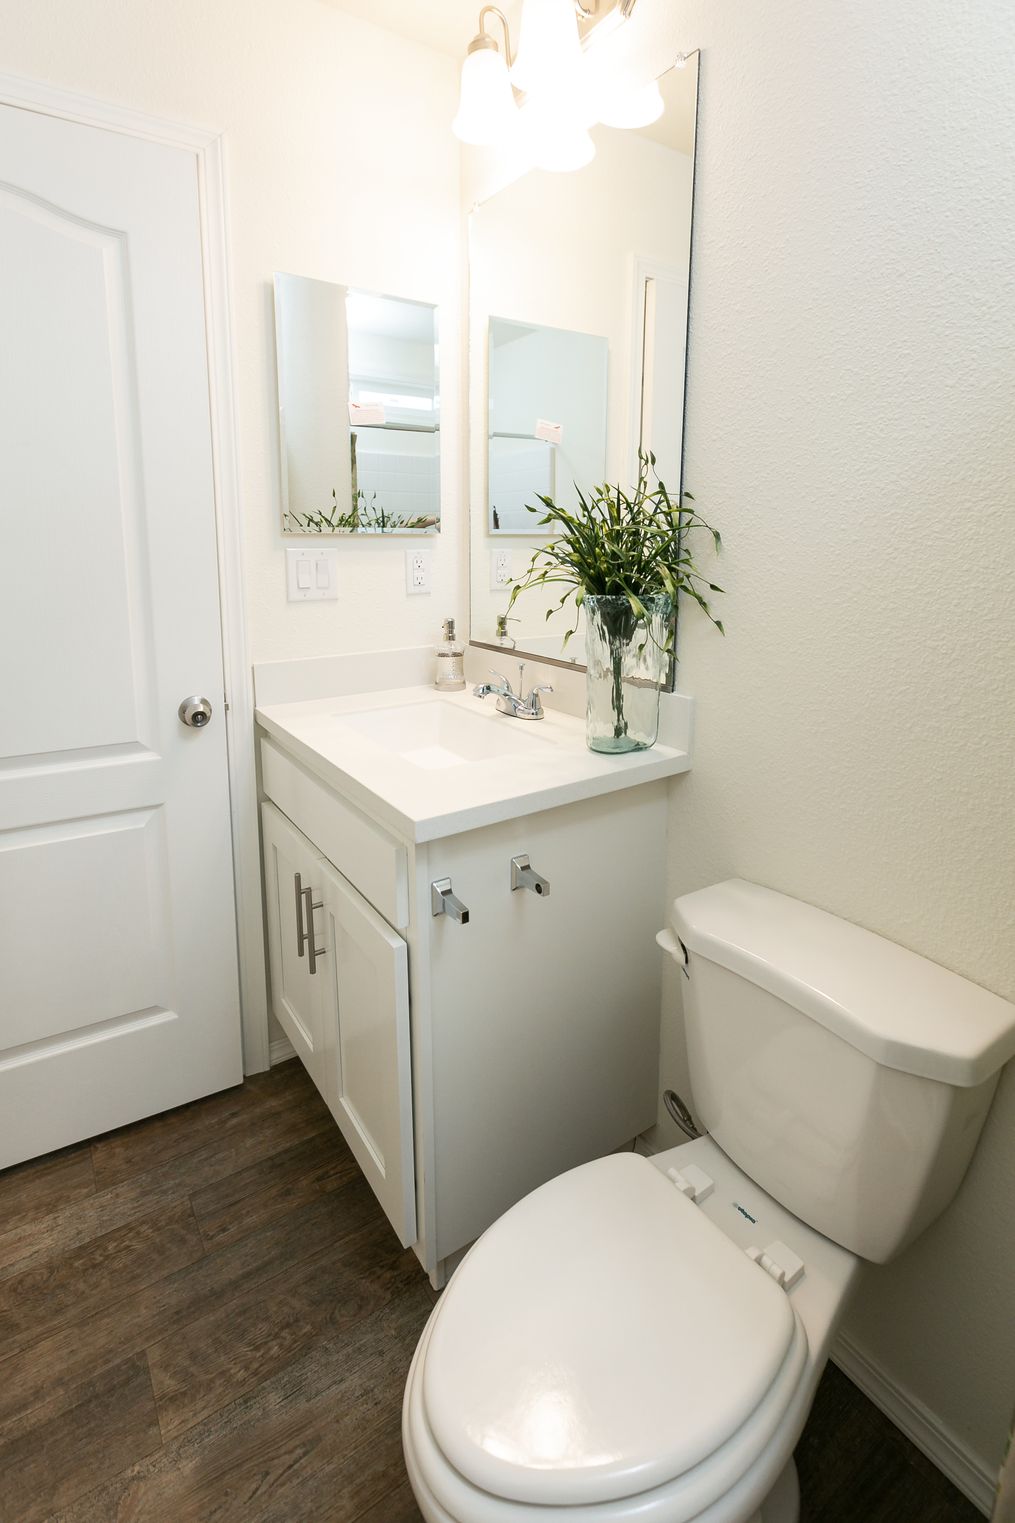 The FAIRPOINT 24322B Primary Bathroom. This Manufactured Mobile Home features 2 bedrooms and 1 bath.